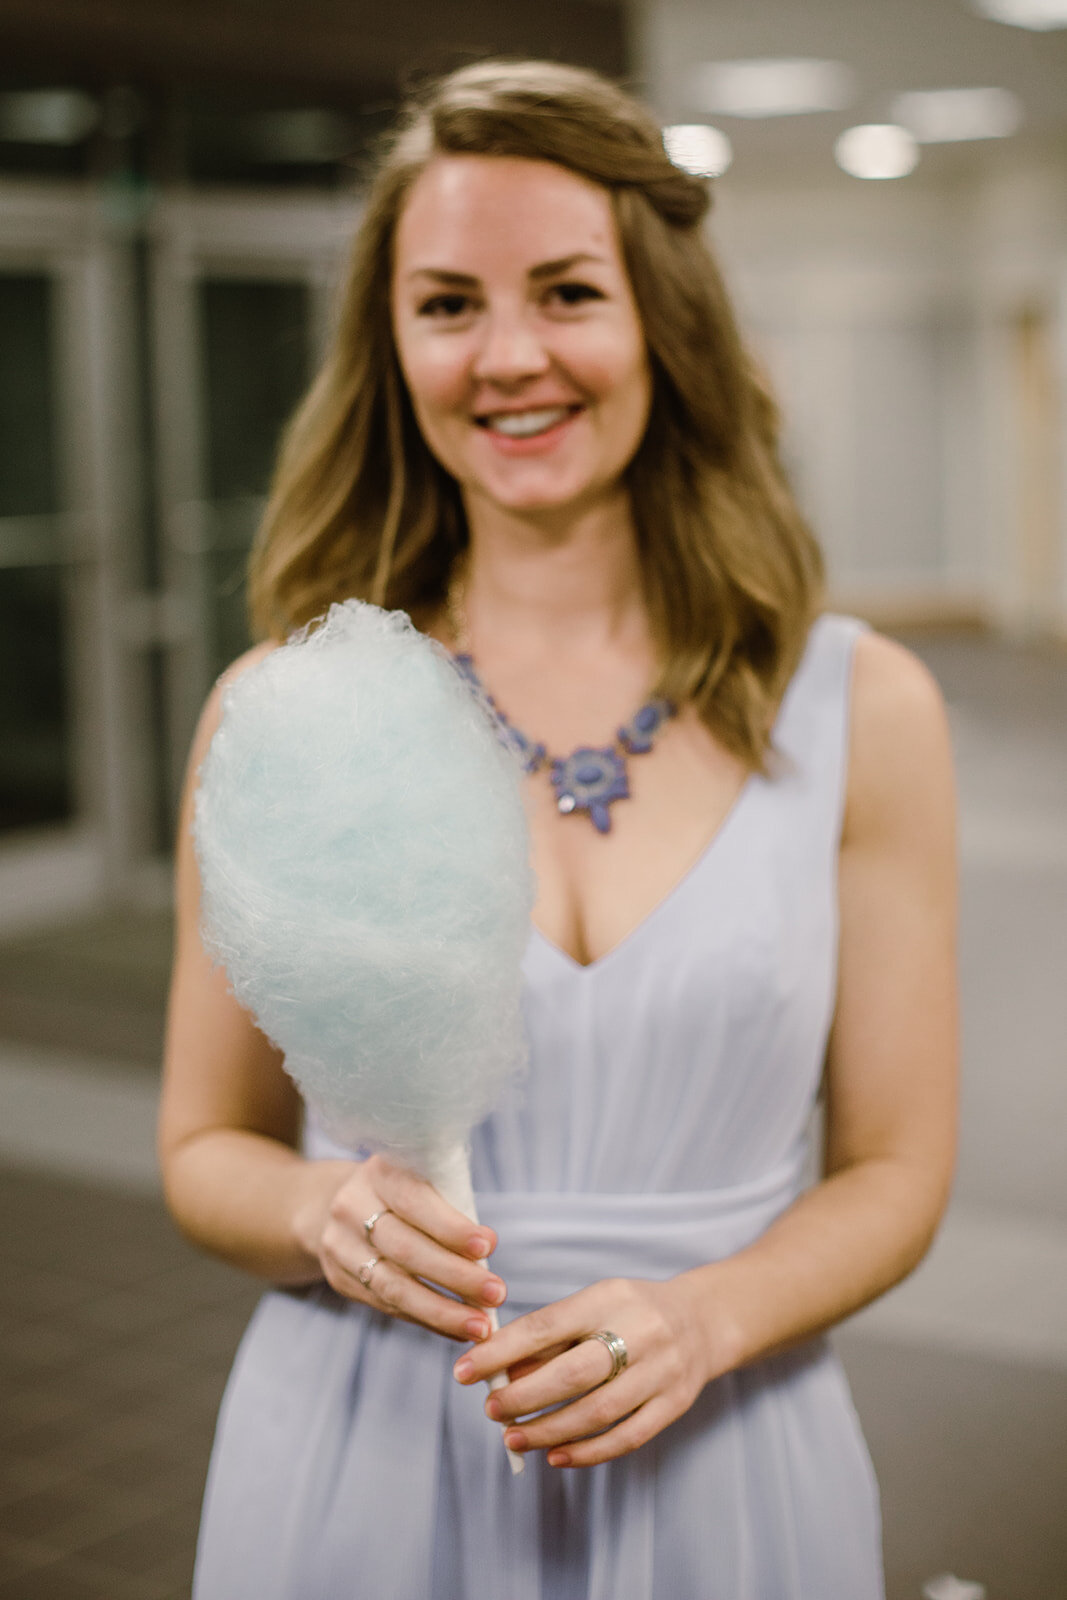  Cotton candy machine at the wedding reception. Vegan wedding at the Norfolk Botanical Gardens, Norfolk, VA. Rose garden and plant inspired wedding on the first day of Pride month. Sarah Mattozzi Photography. 